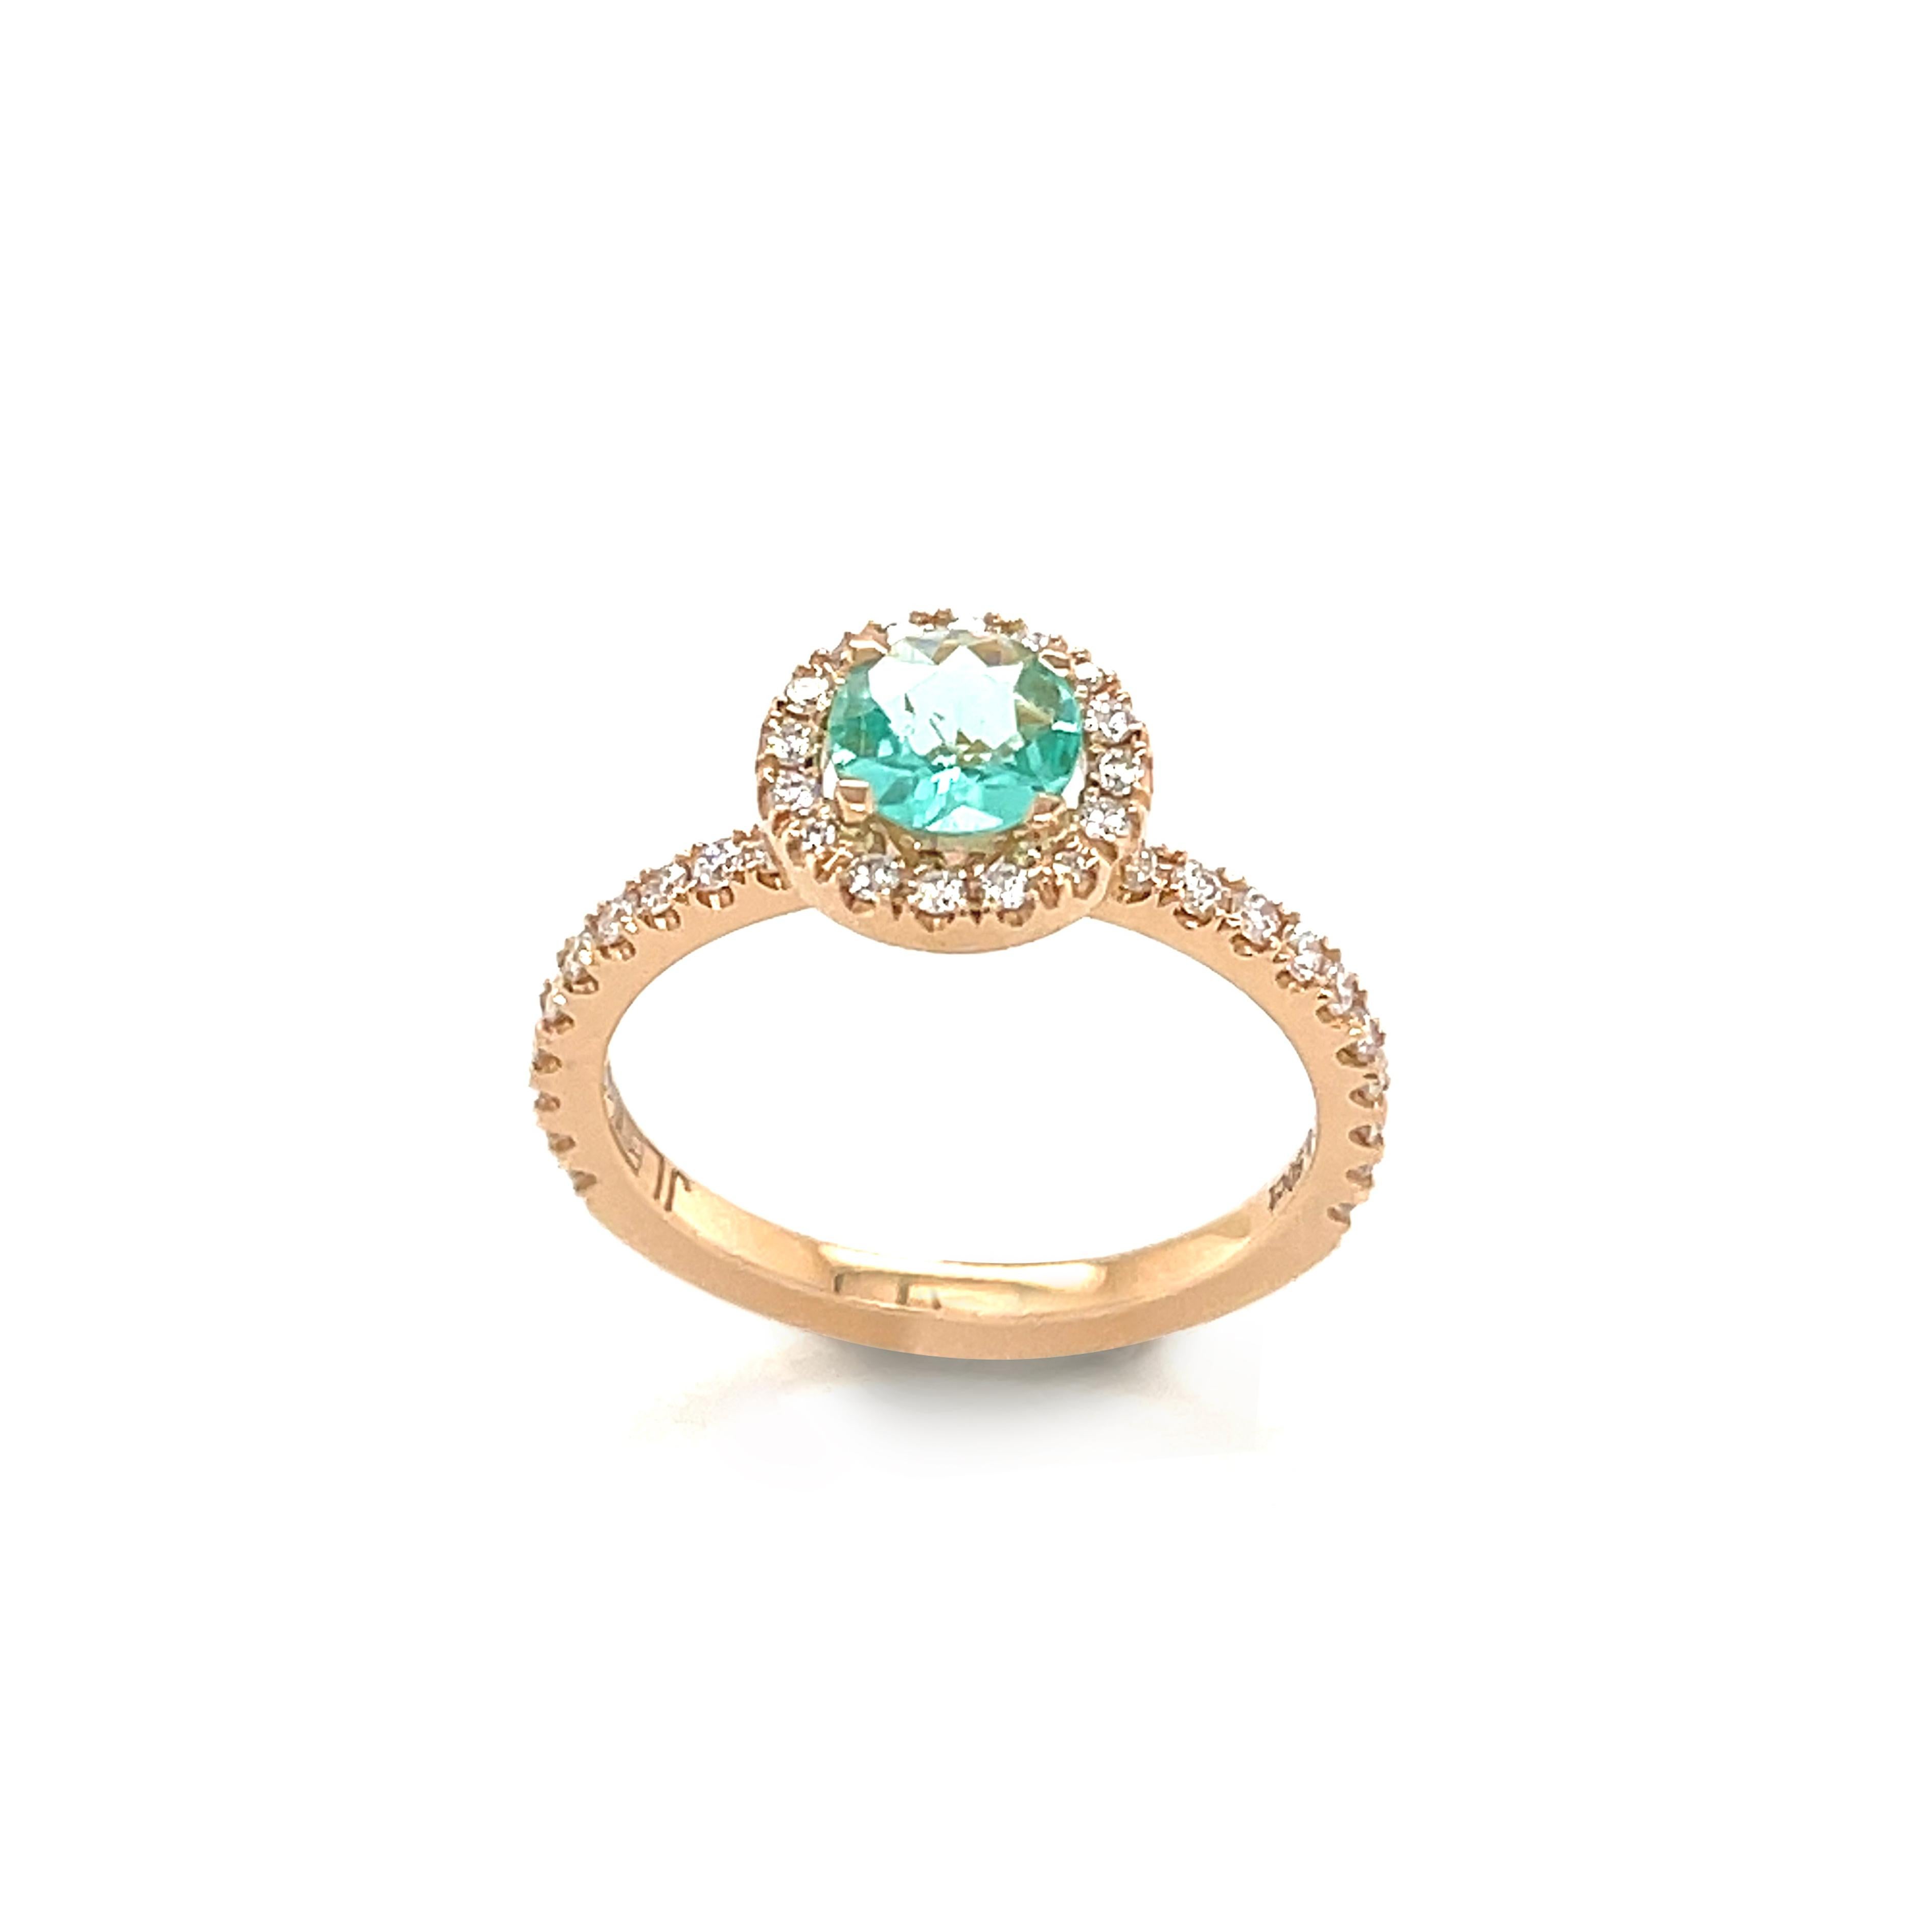 18 Karat Yellow Gold Solitaire ring set with a 0.50 Carat Paraiba Tourmaline stone.

Round mixed cut: diameter 5,71 mm
The Paraiba Tourmaline is set with Moissanite (on request of the customer) weighing 0.30 carat in a castle setting.

This ring is